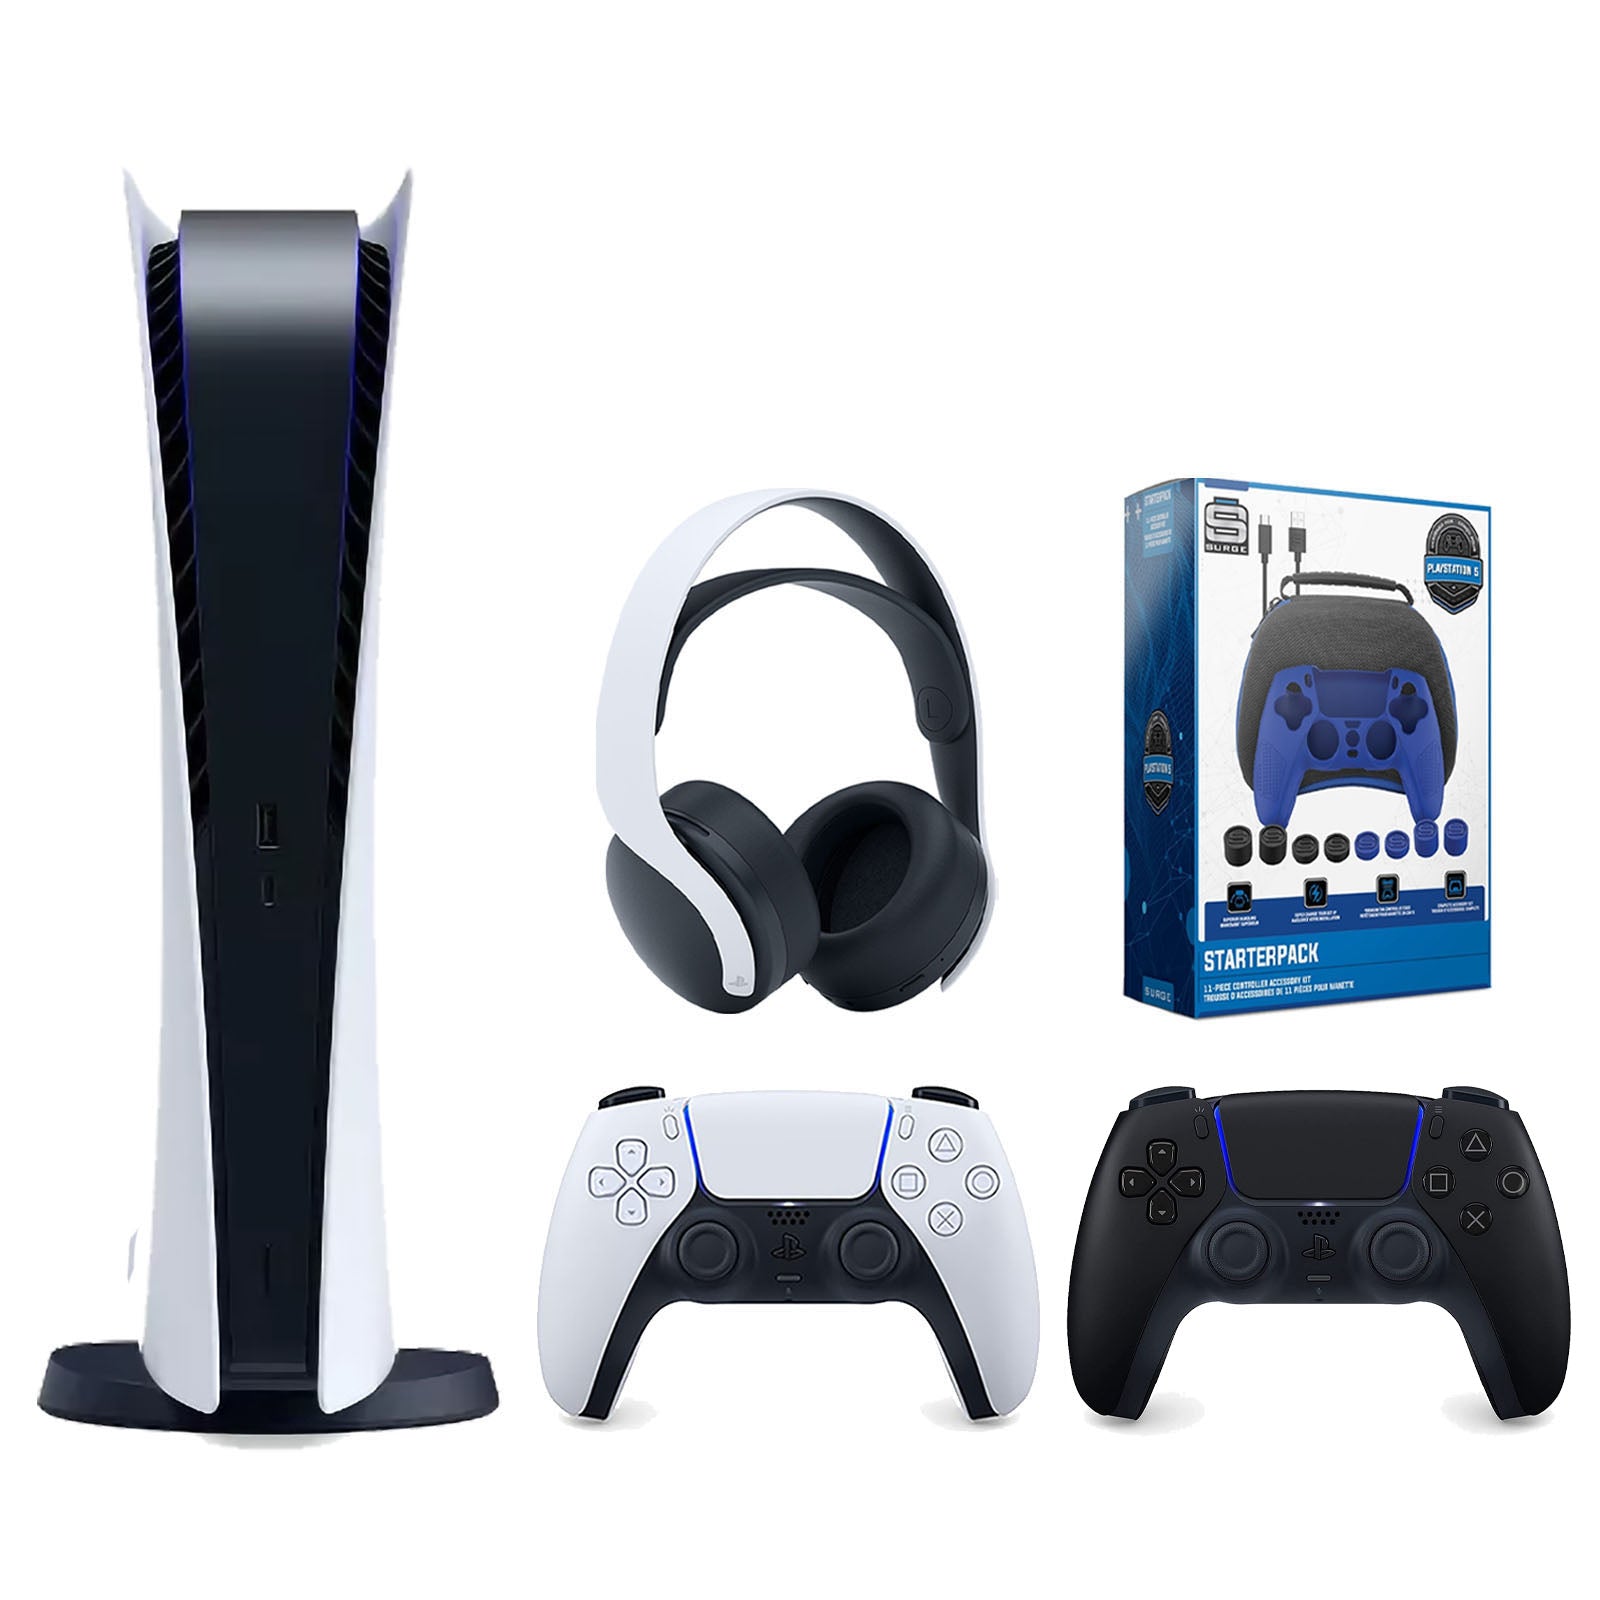 Sony Playstation 5 Digital Edition Console with Extra Black Controller, White PULSE 3D Headset and Surge Pro Gamer Starter Pack 11-Piece Accessory Bundle - Pro-Distributing